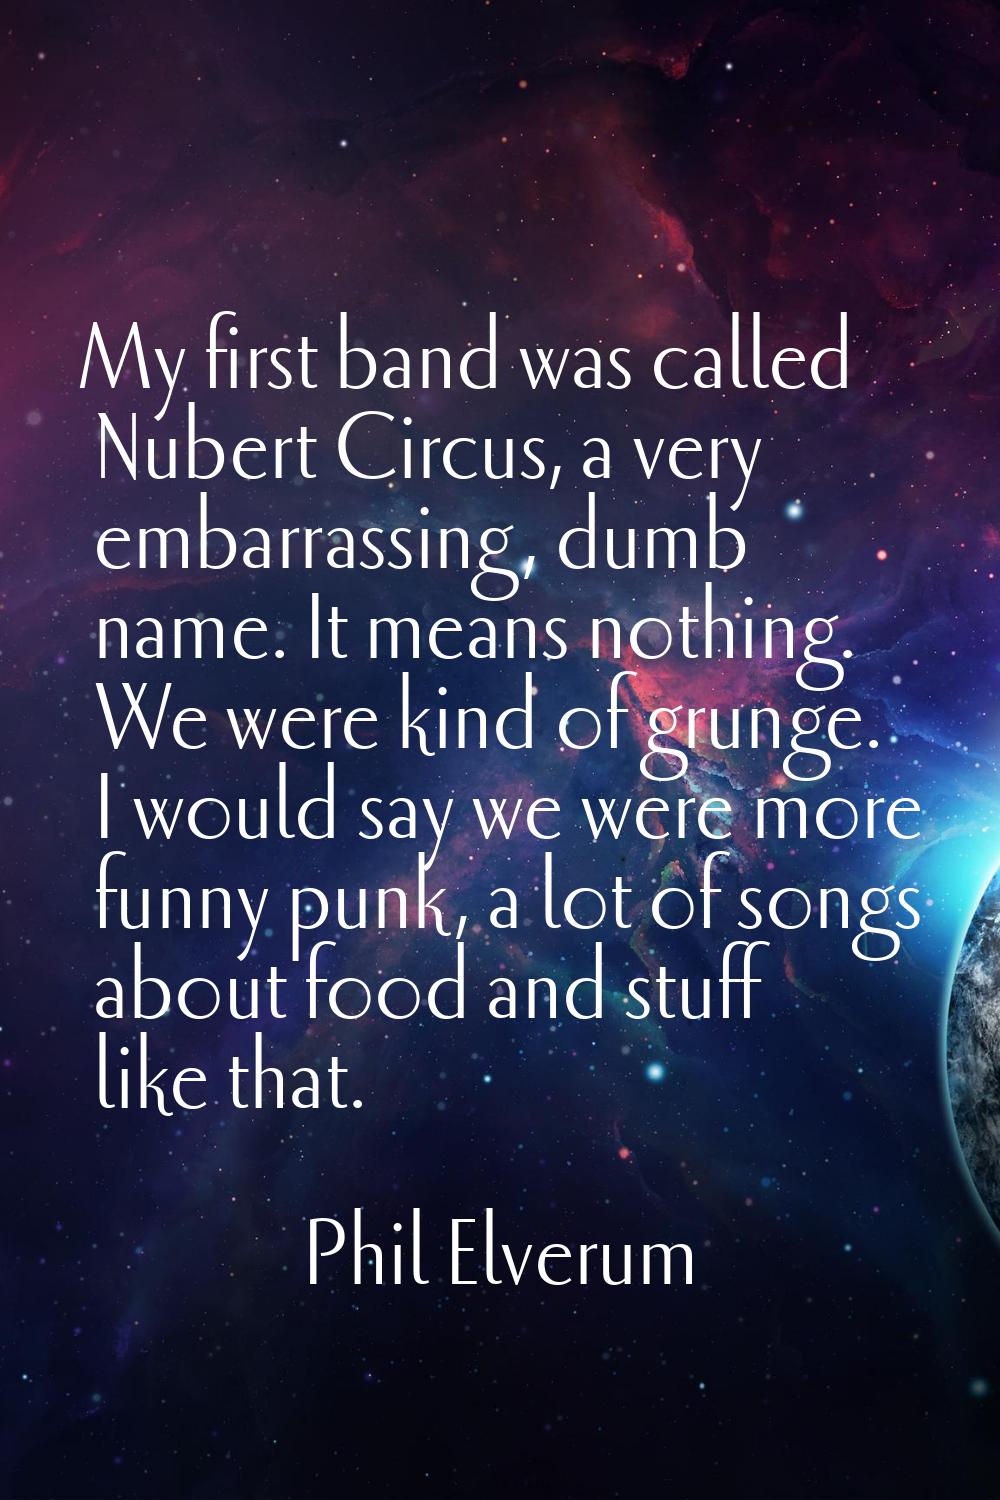 My first band was called Nubert Circus, a very embarrassing, dumb name. It means nothing. We were k